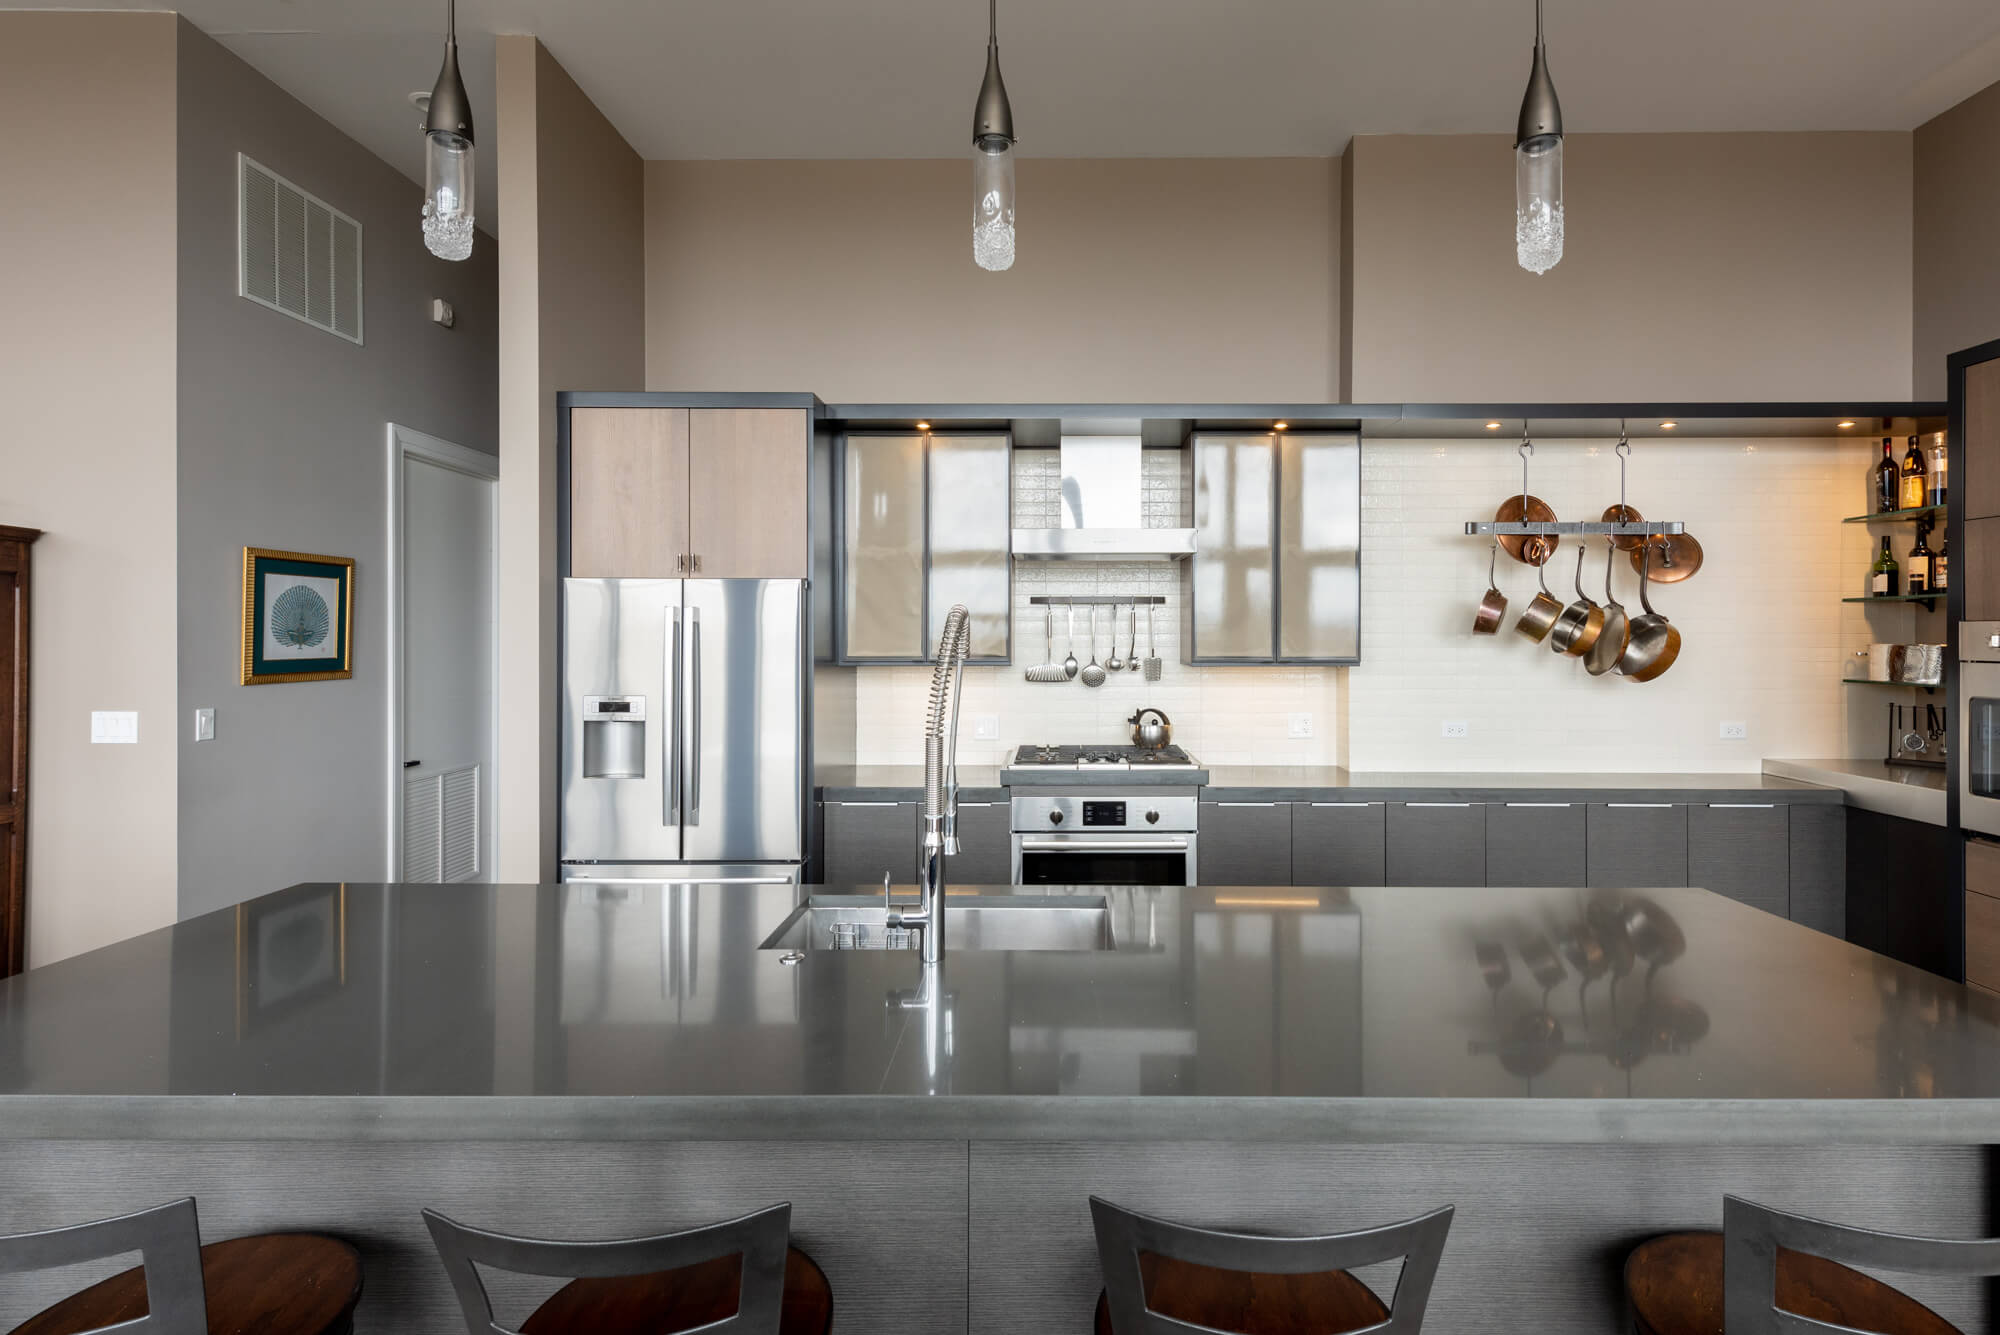 A moody urban loft style kitchen with two tone cabinets and metal cabinet accent doors.